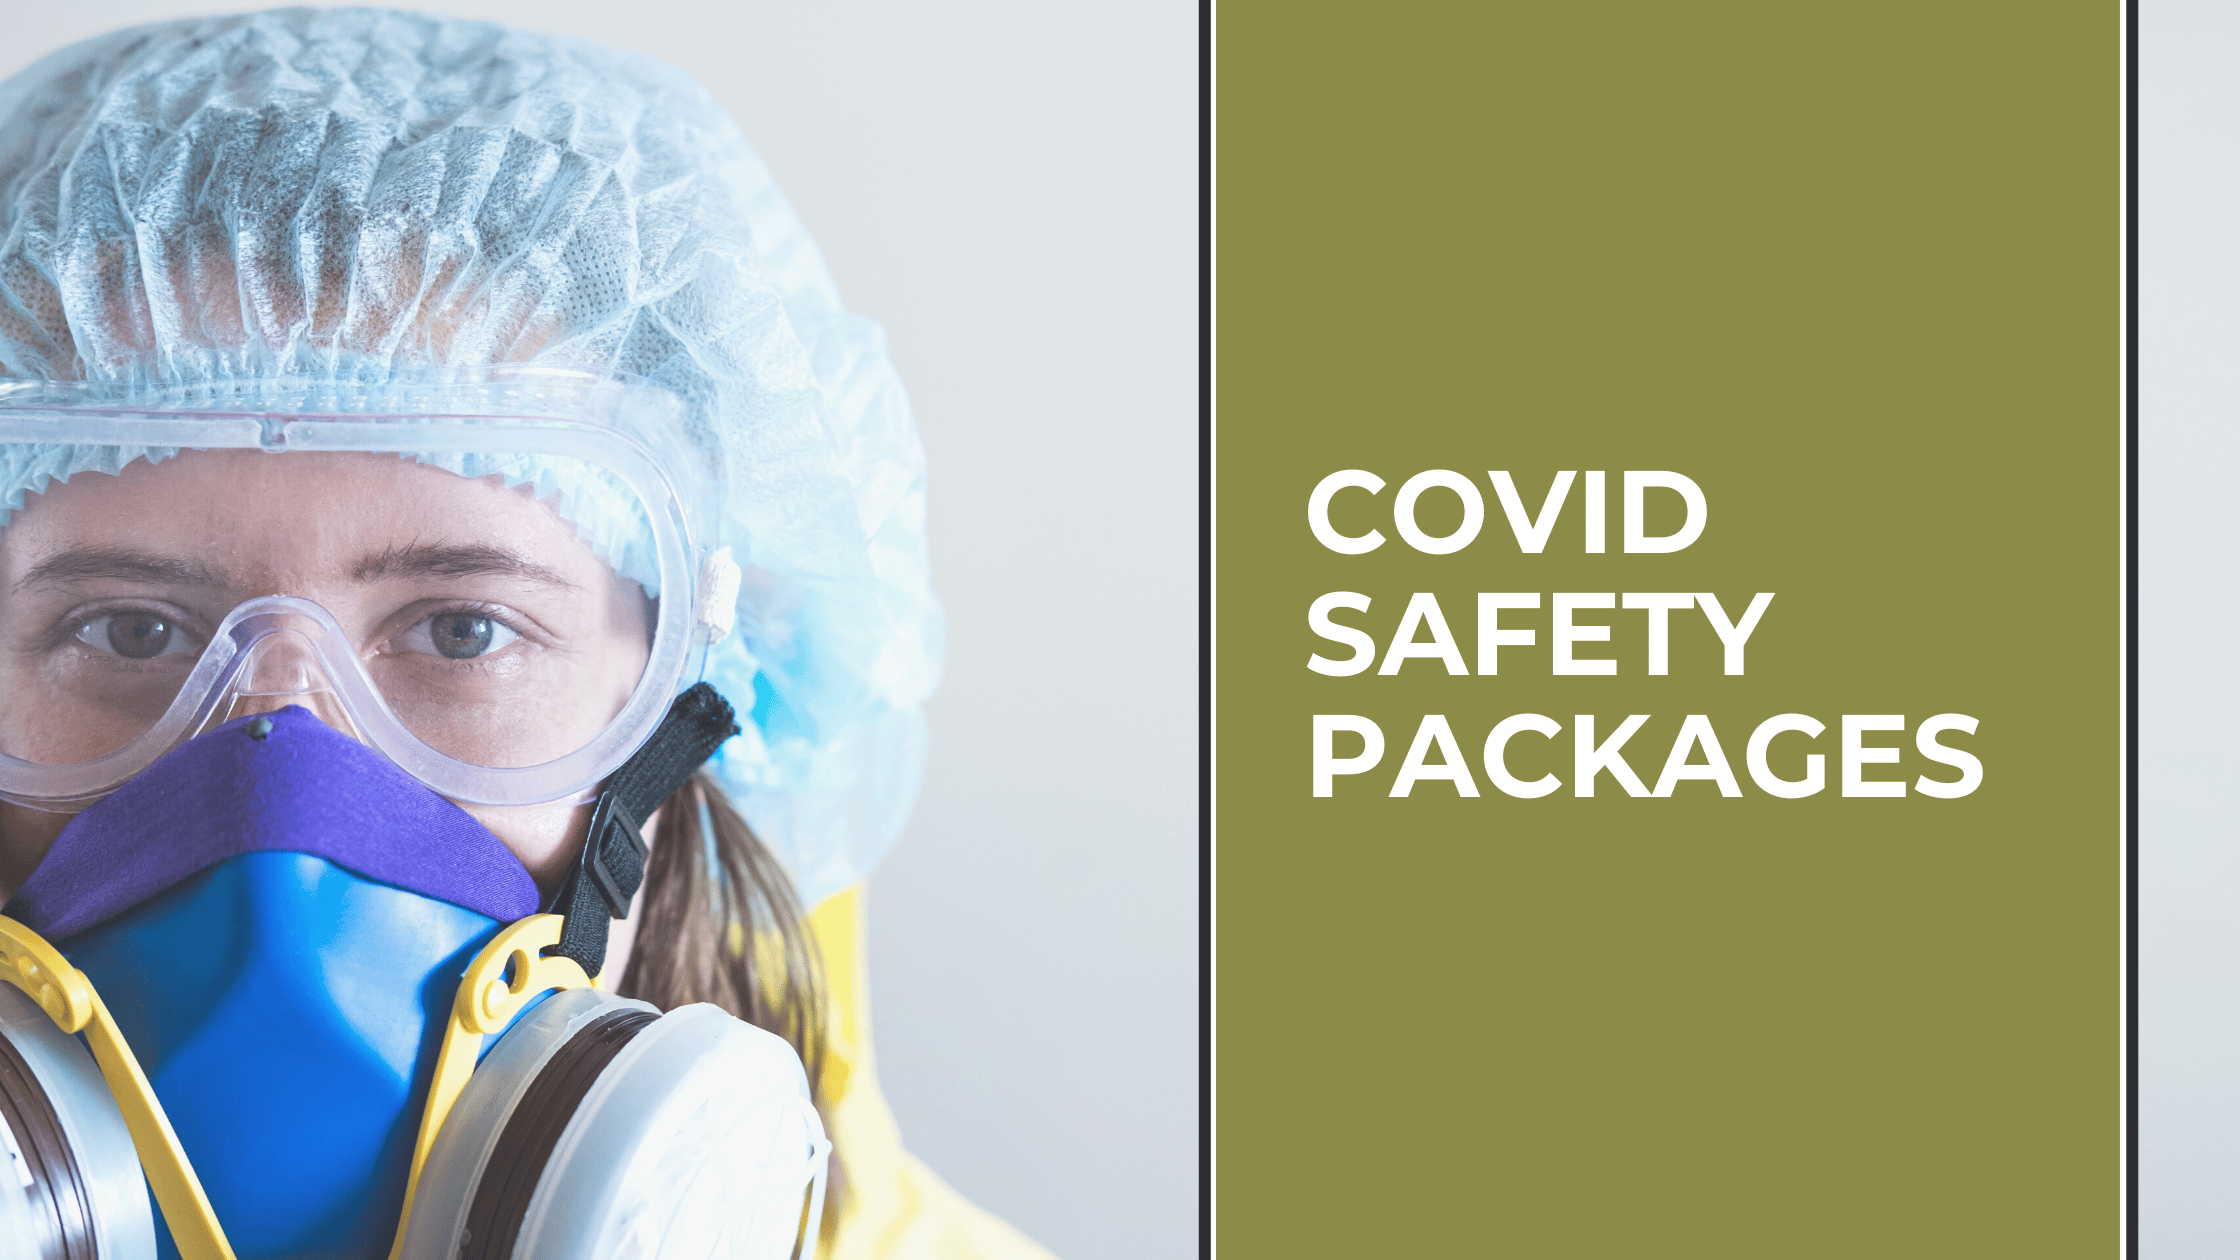 Covid Safety Packages